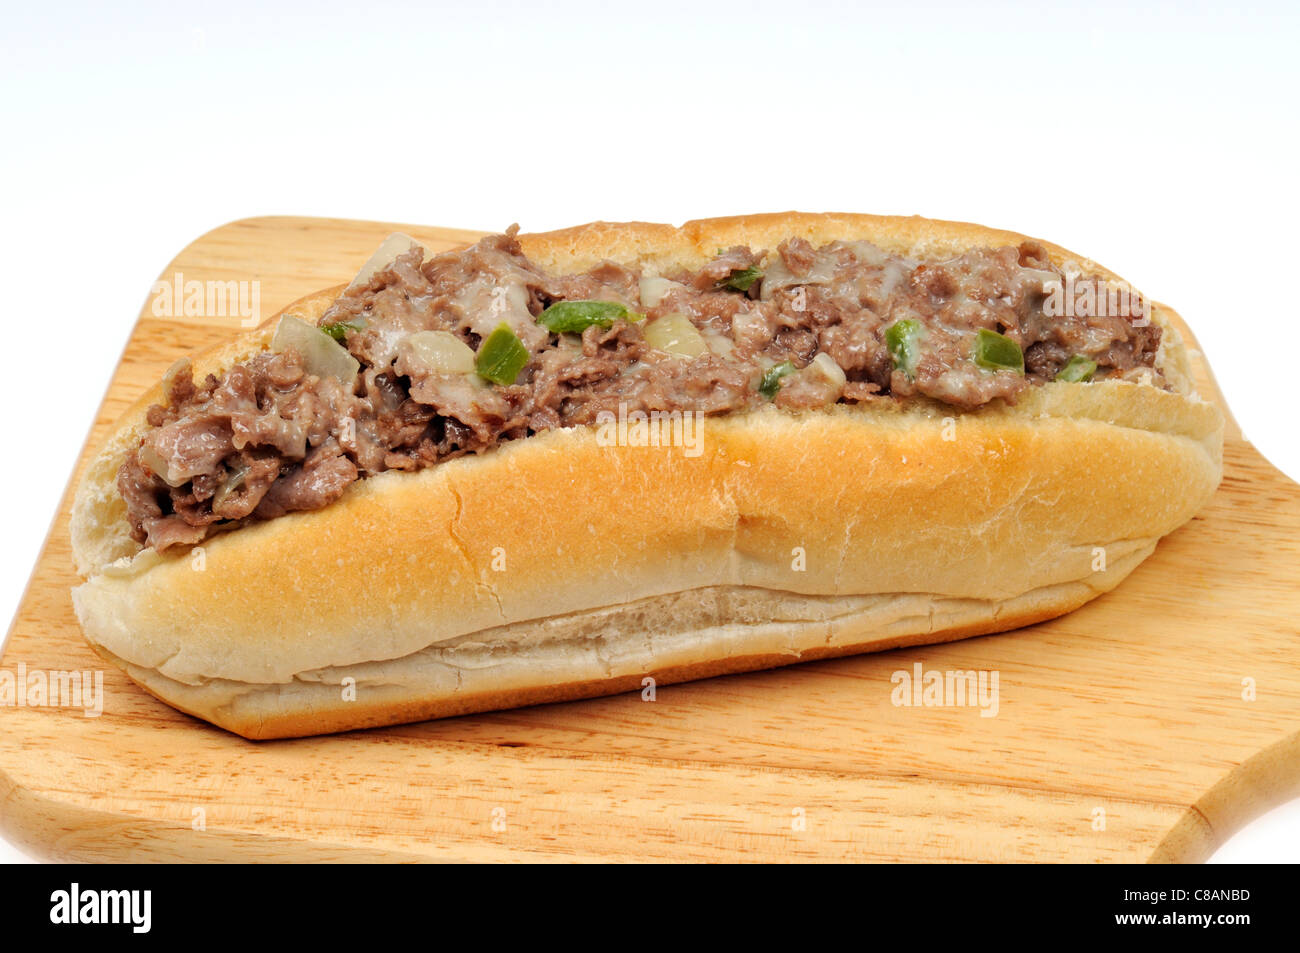 Closeup of a Philly cheesesteak on a wood cutting board with a white background. Stock Photo